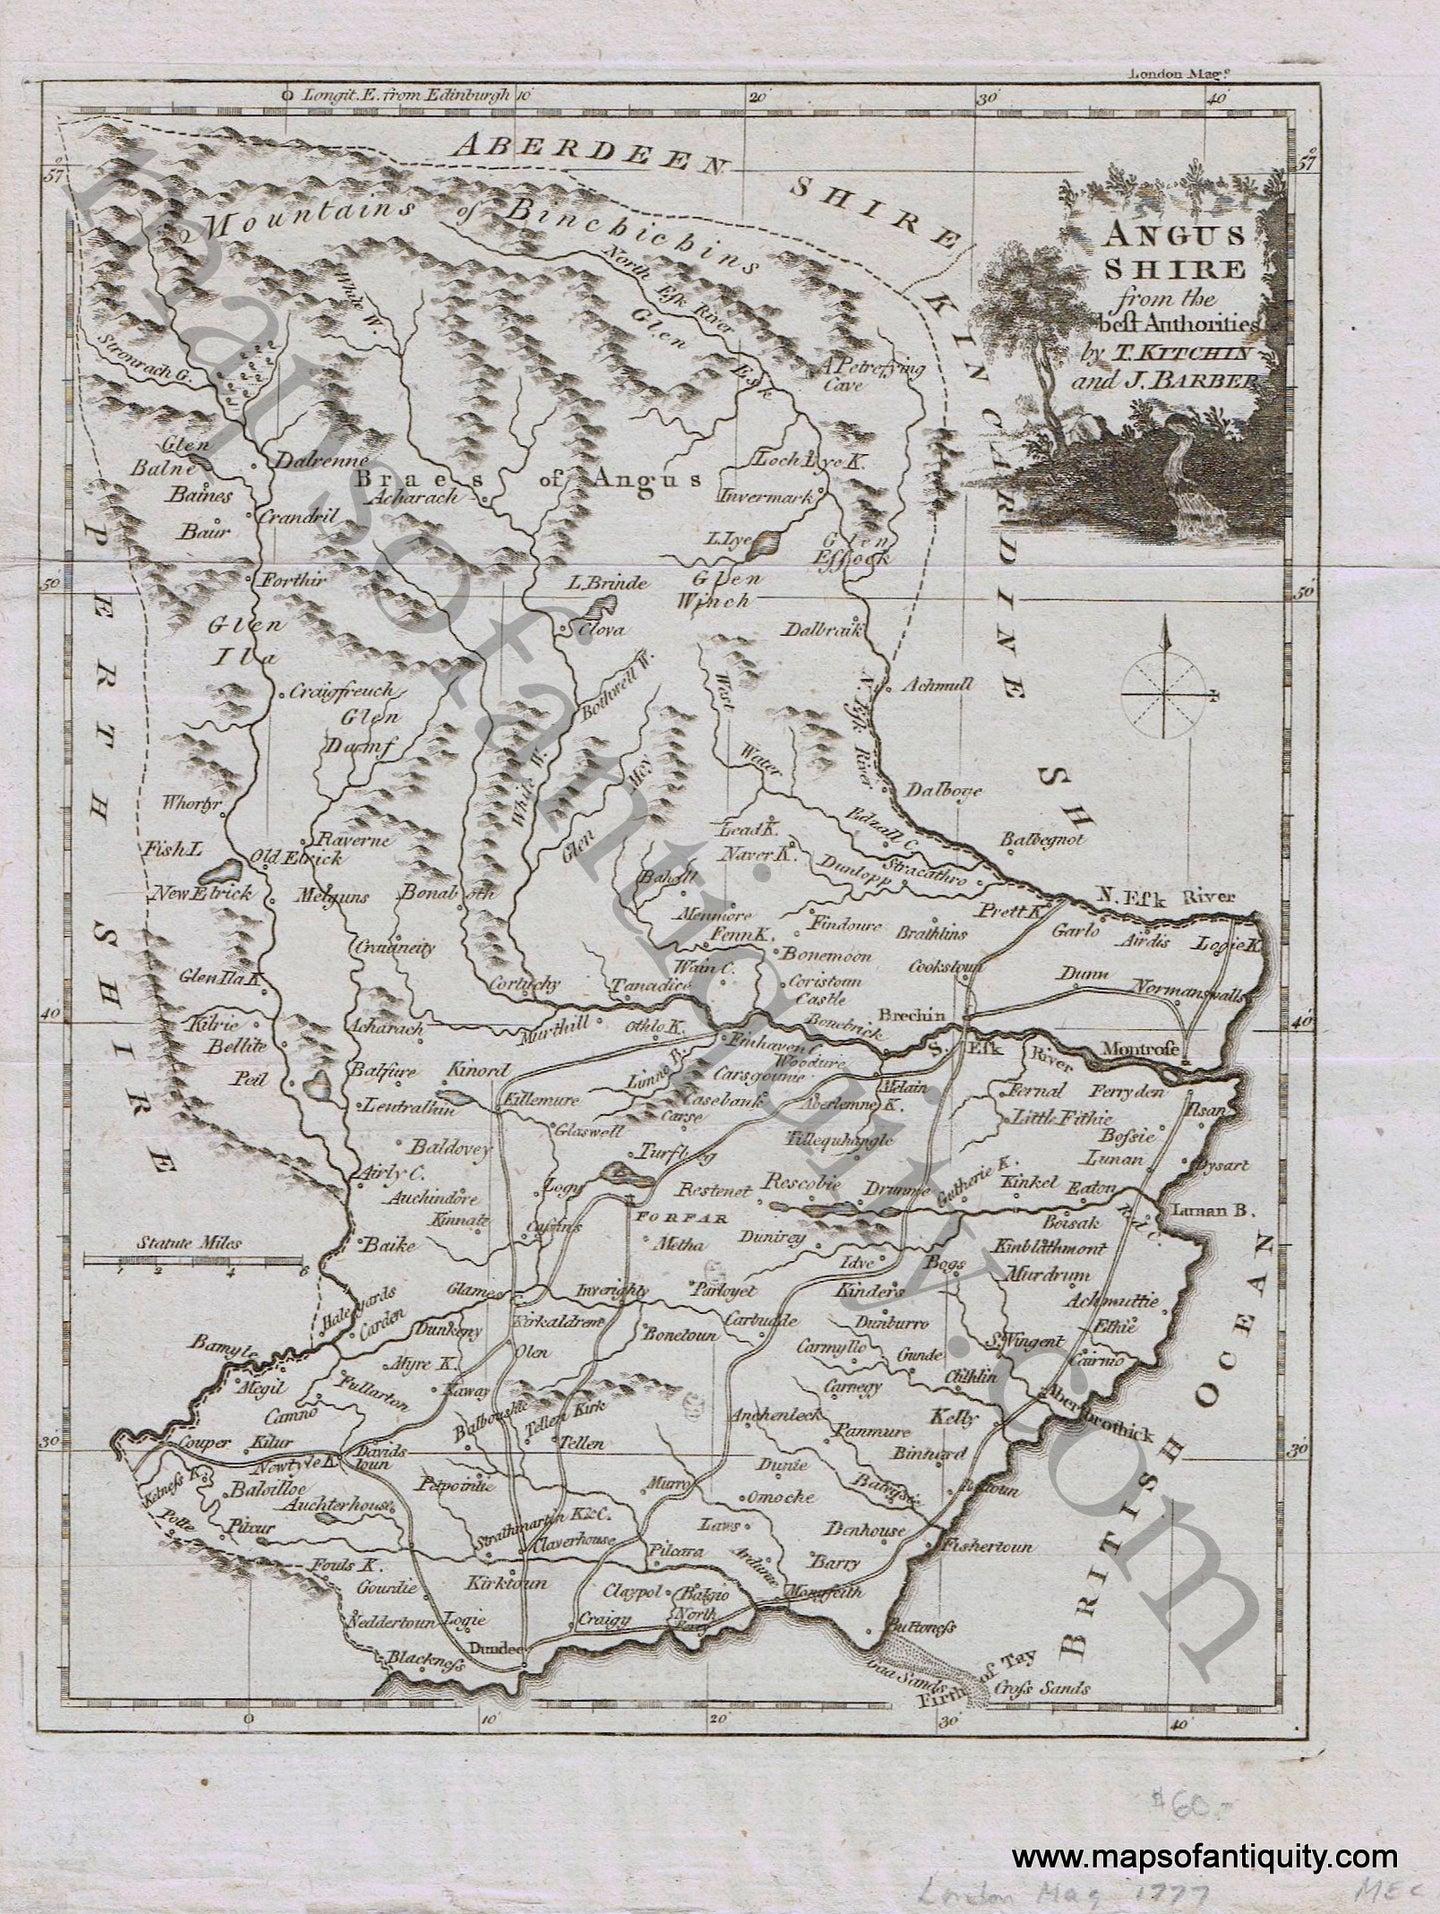 Antique-Black-and-White-Map-Europe-Angus-Shire-from-the-best-Authorities-1777-Kitchin-and-Barber/London-Magazine-England-1700s-18th-century-Maps-of-Antiquity